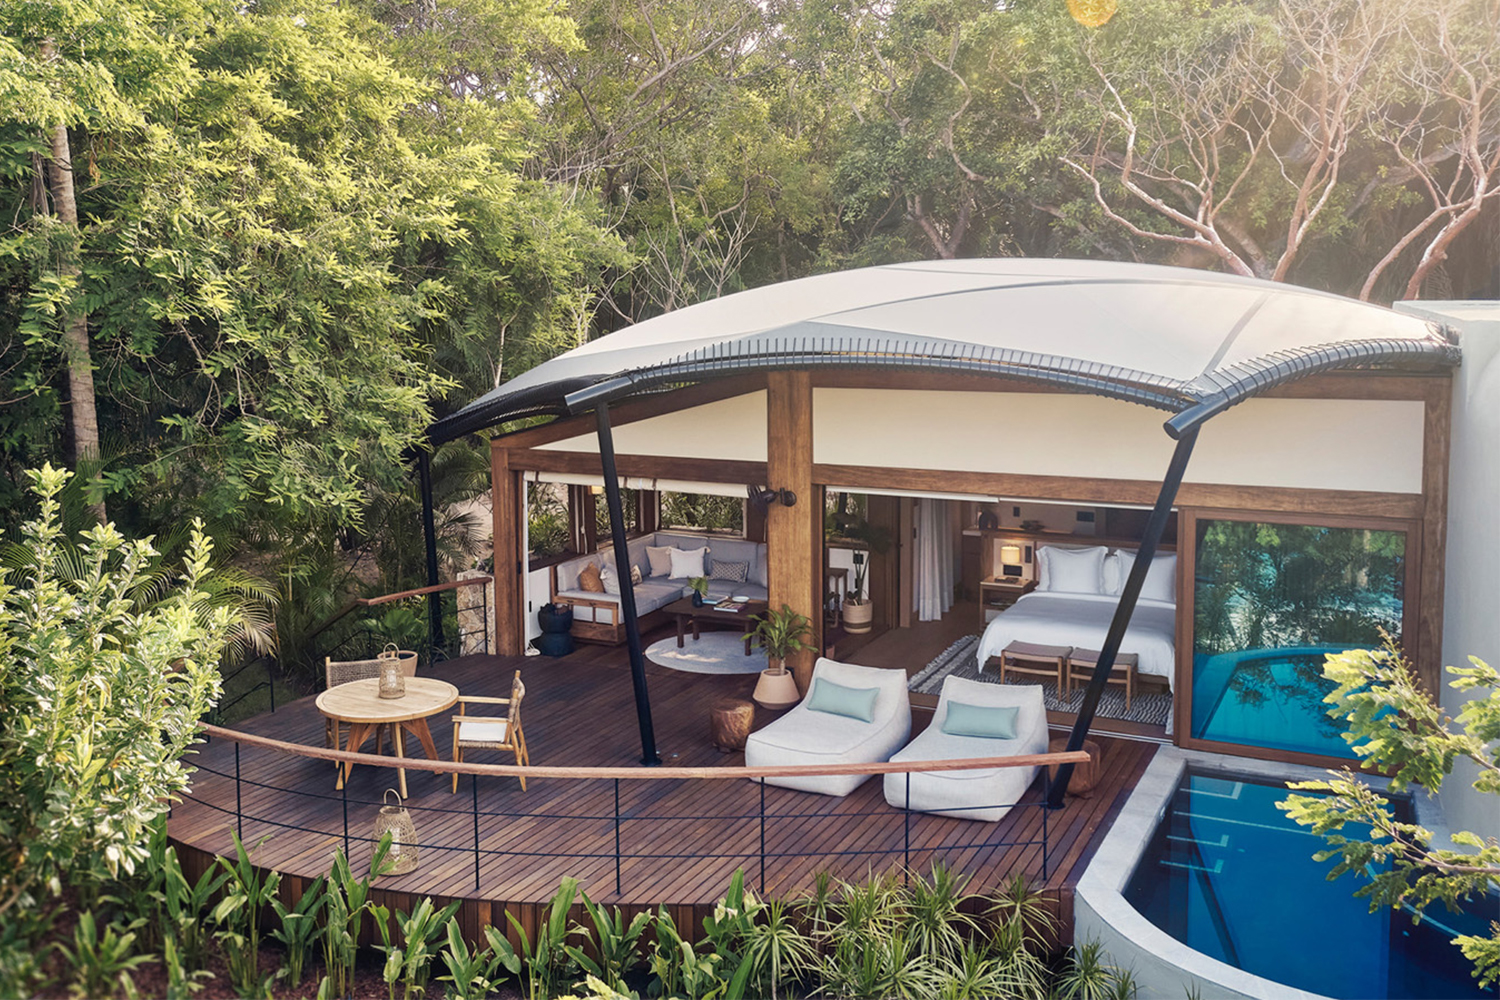 One of the luxury glamping tents at Naviva, A Four Seasons Resort, in Mexico